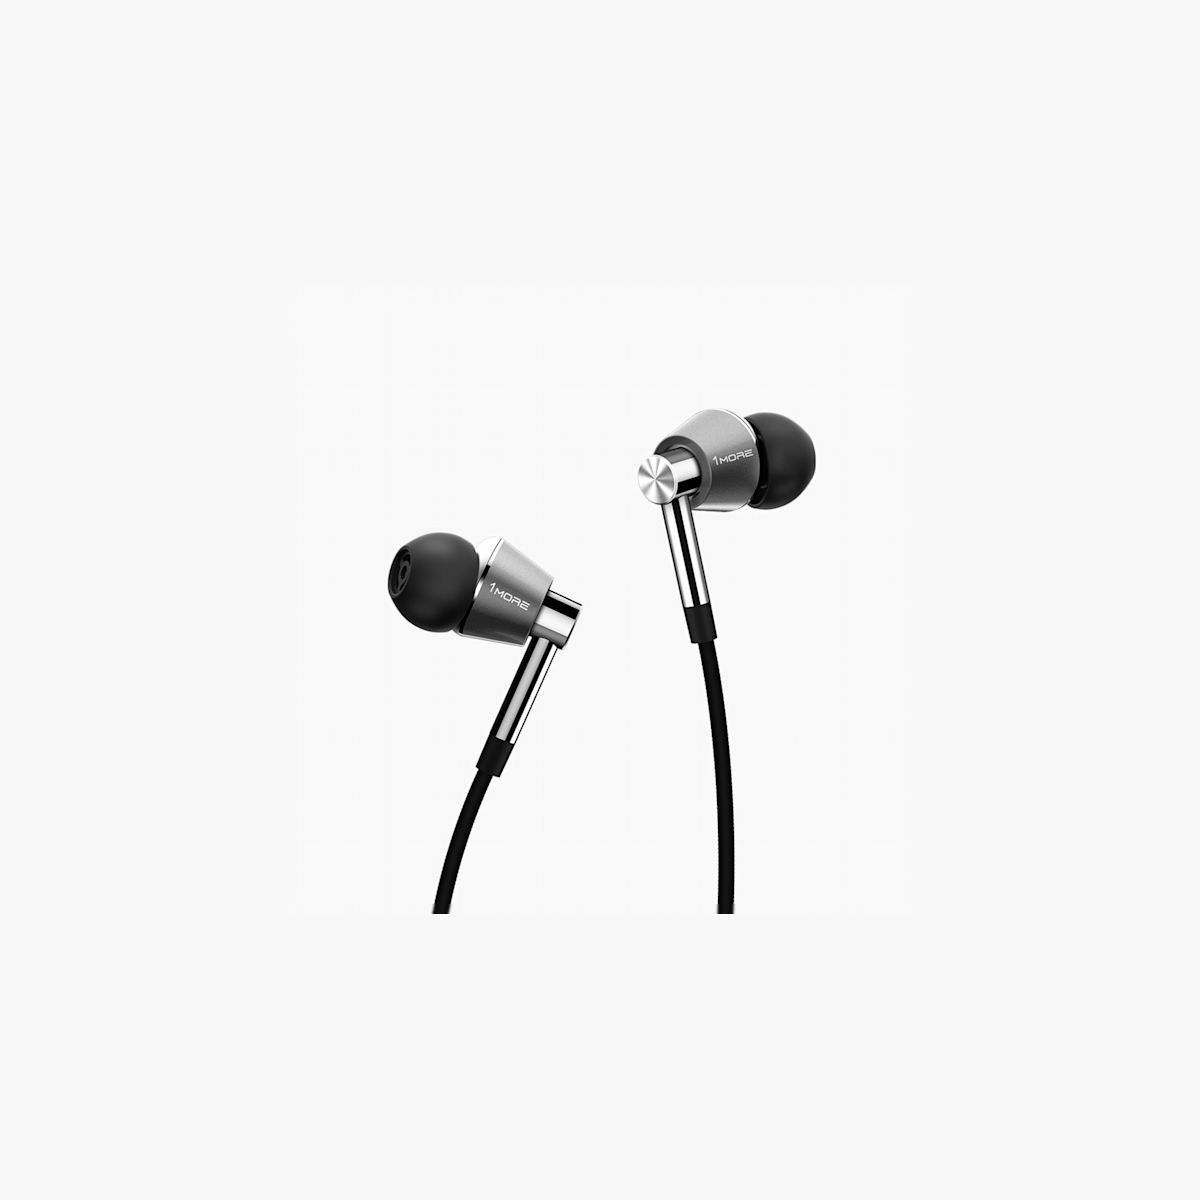 Monoprice Triple XXX Triple Driver Earbuds Headphones w/In-line Mic and 1-button Control 118516